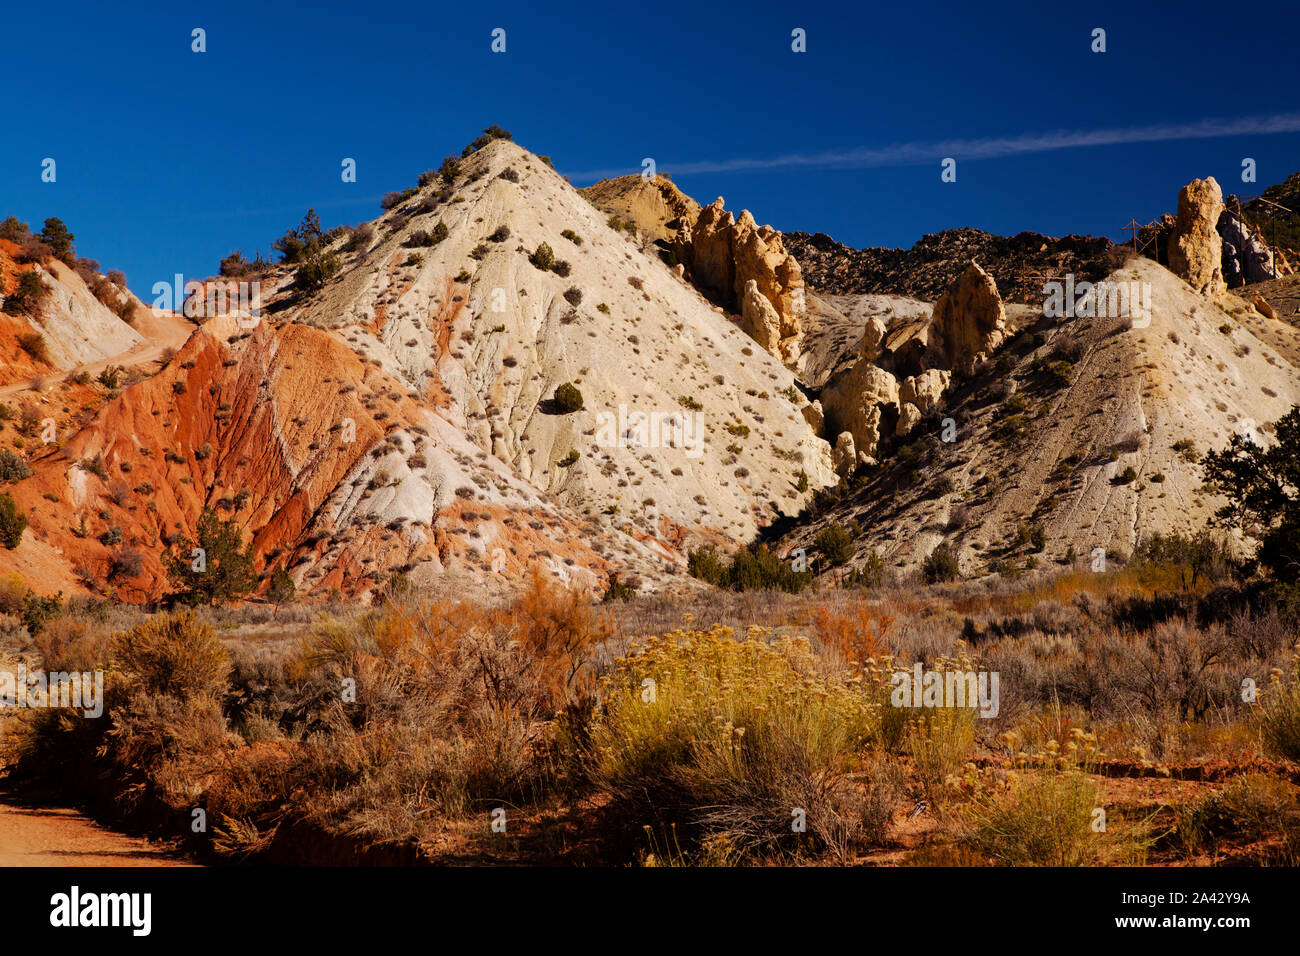 Whimsical and surreal 'Candyland' landscape along the Cottonwood Canyon Road in the Grand Staircase Escalante National Monument, Utah. Stock Photo